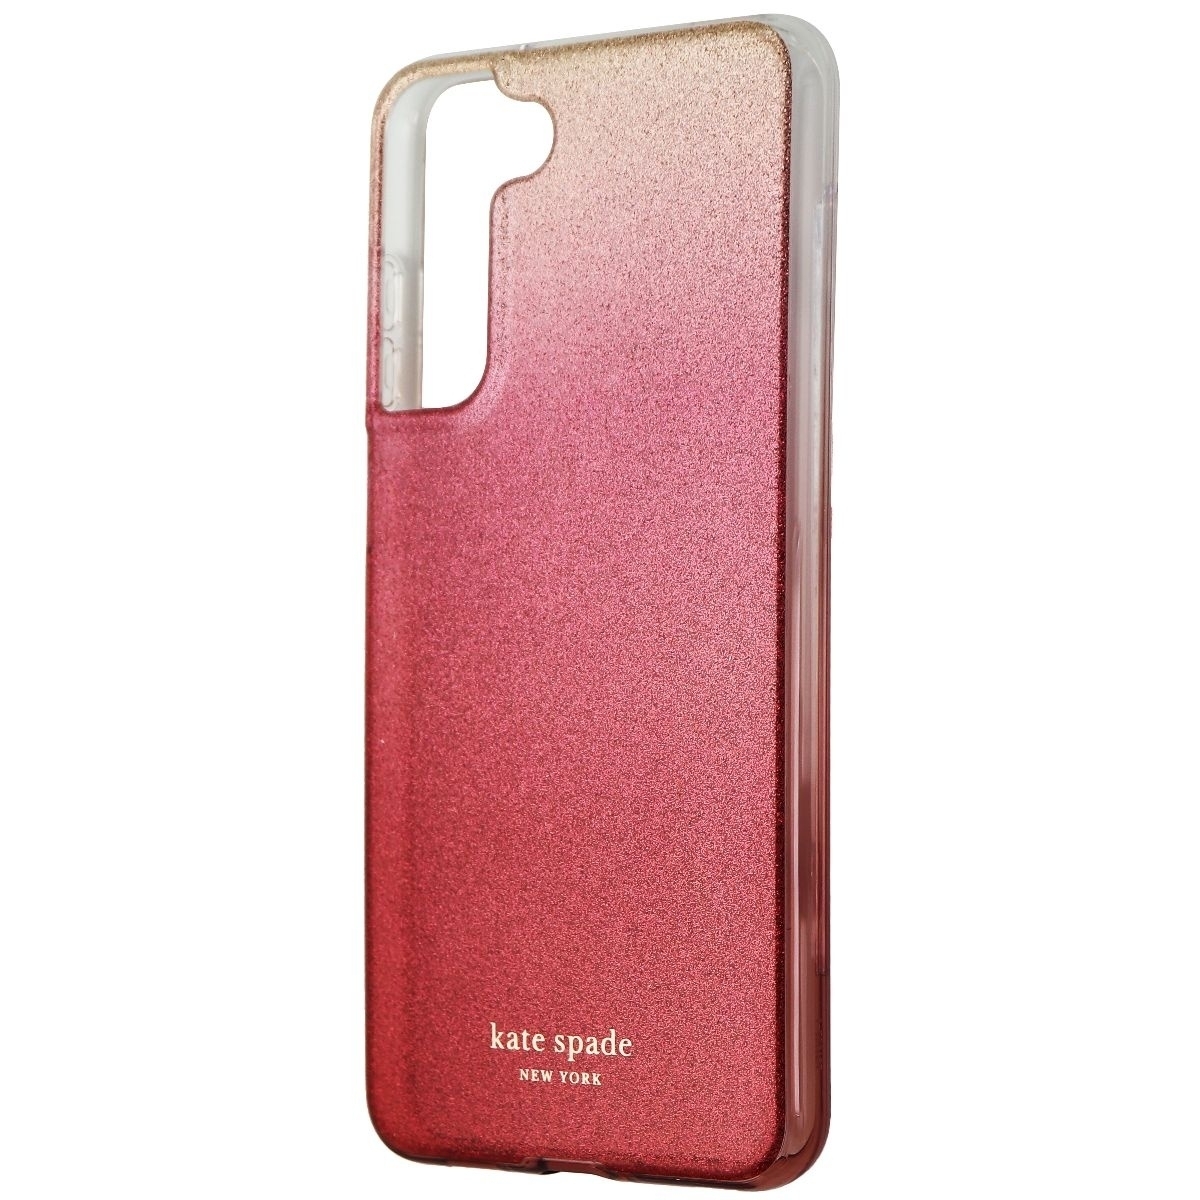 Kate Spade New York Series Case For Samsung Galaxy S21 FE 5G - Glitter/Red